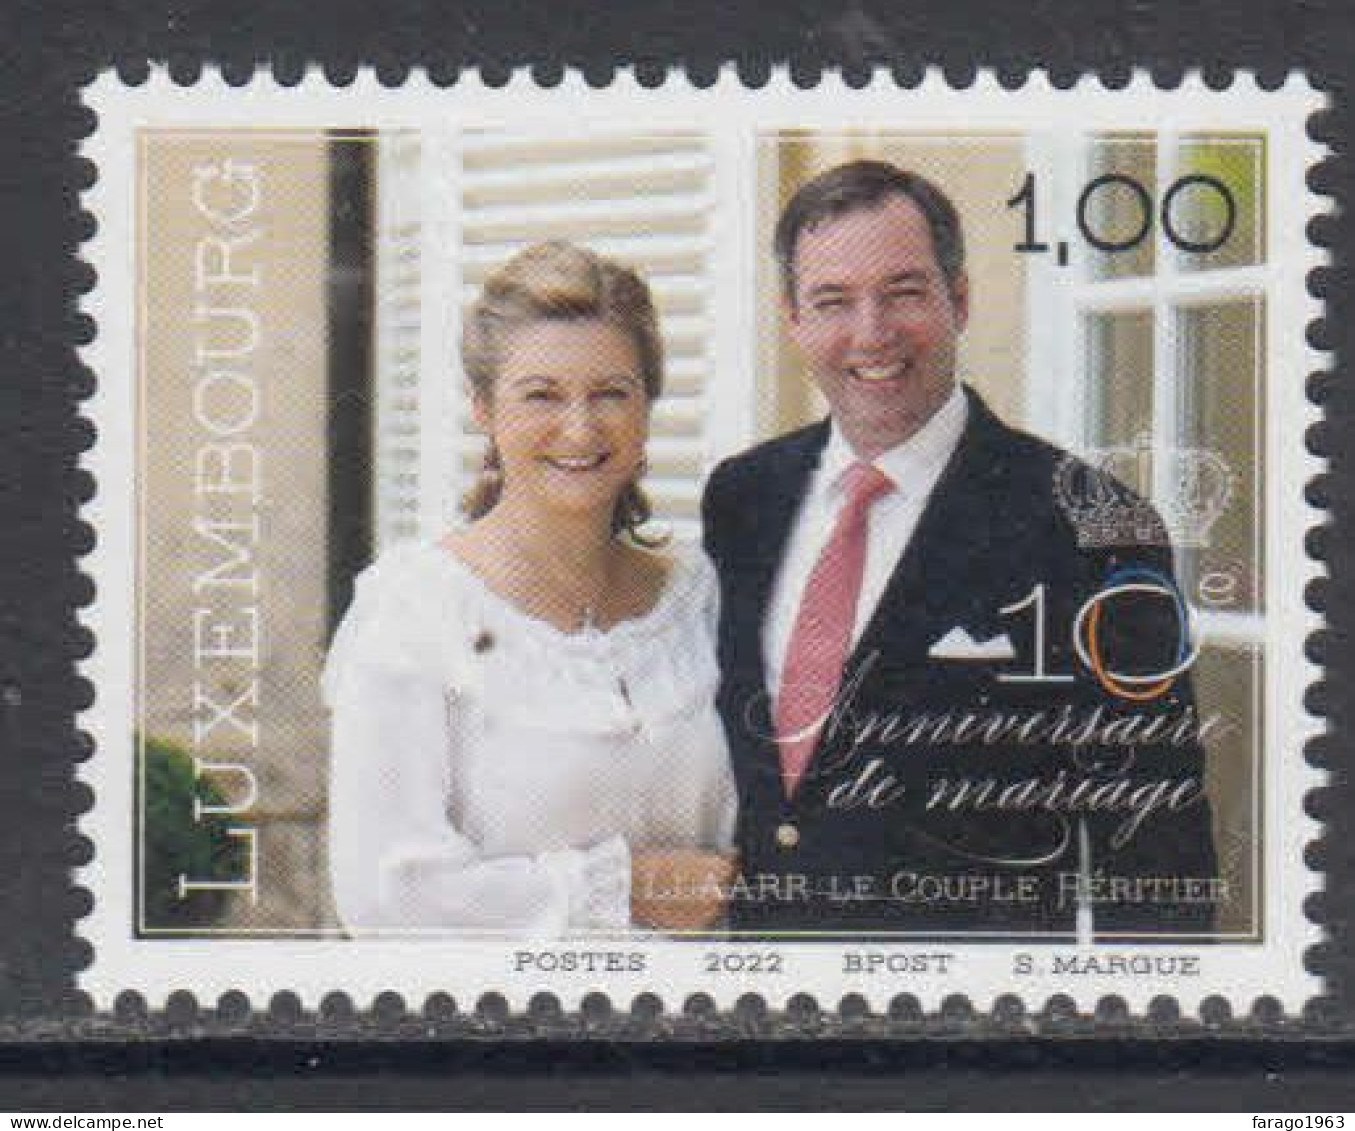 2022 Luxembourg Wedding Anniversary Royalty Complete Set Of 1 MNH  @ BELOW FACE VALUE - Nuovi